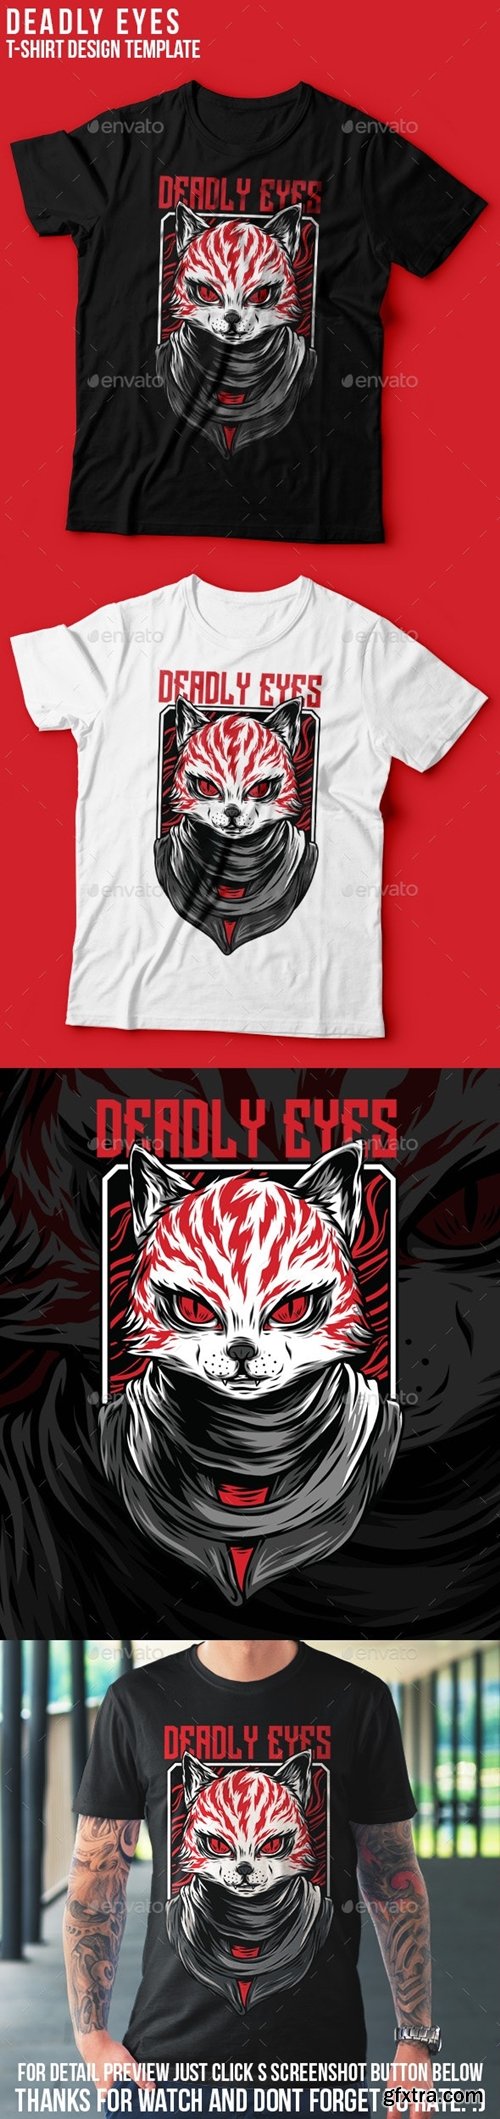 GraphicRiver - Deadly Eyes T-Shirt Design 23843031